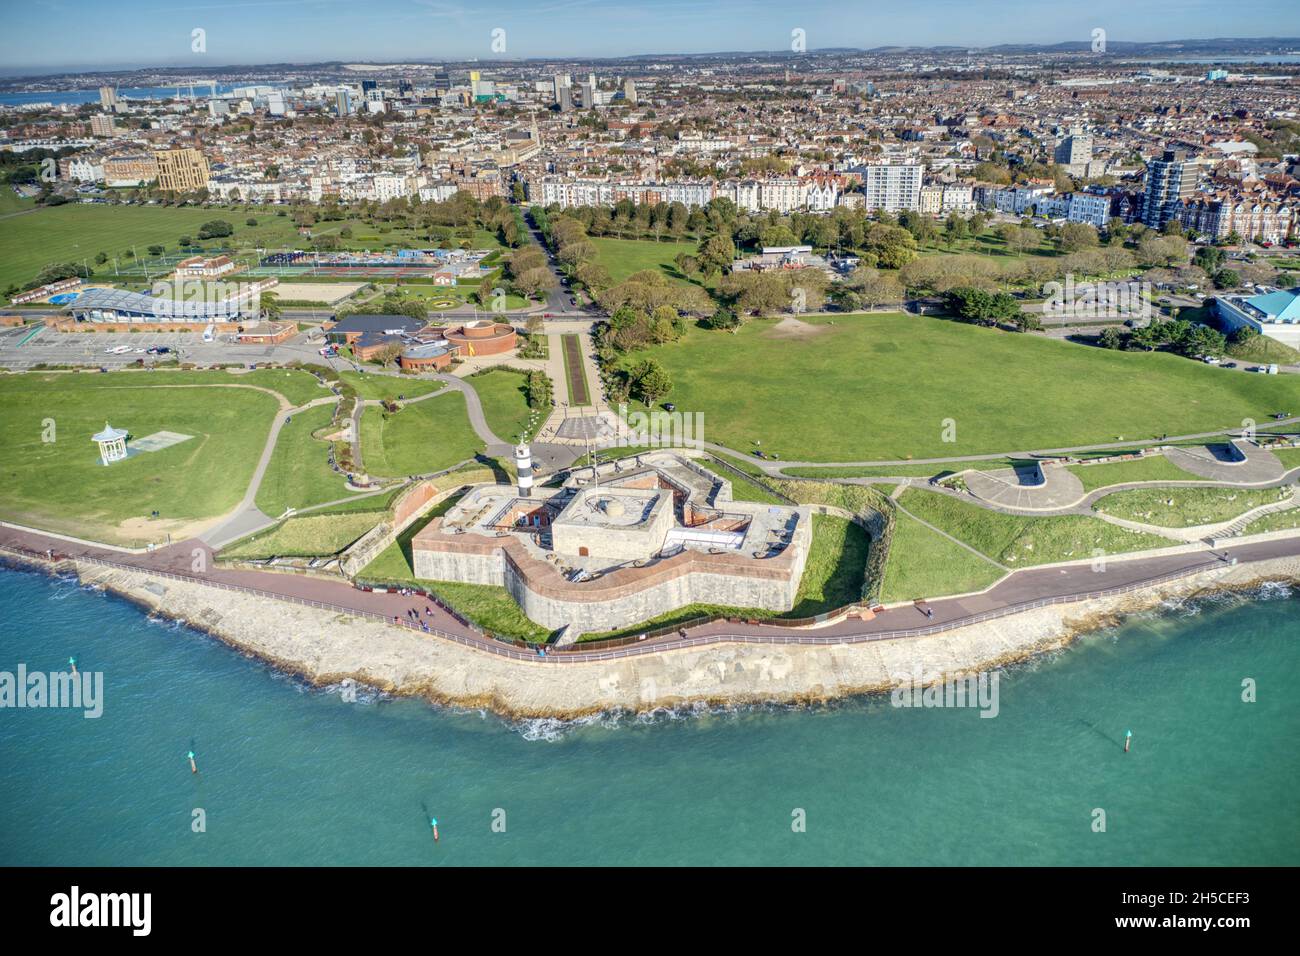 Southsea Castle with the seafront promenade in view in a coastline position to defend Portsmouth, aerial view. Stock Photo